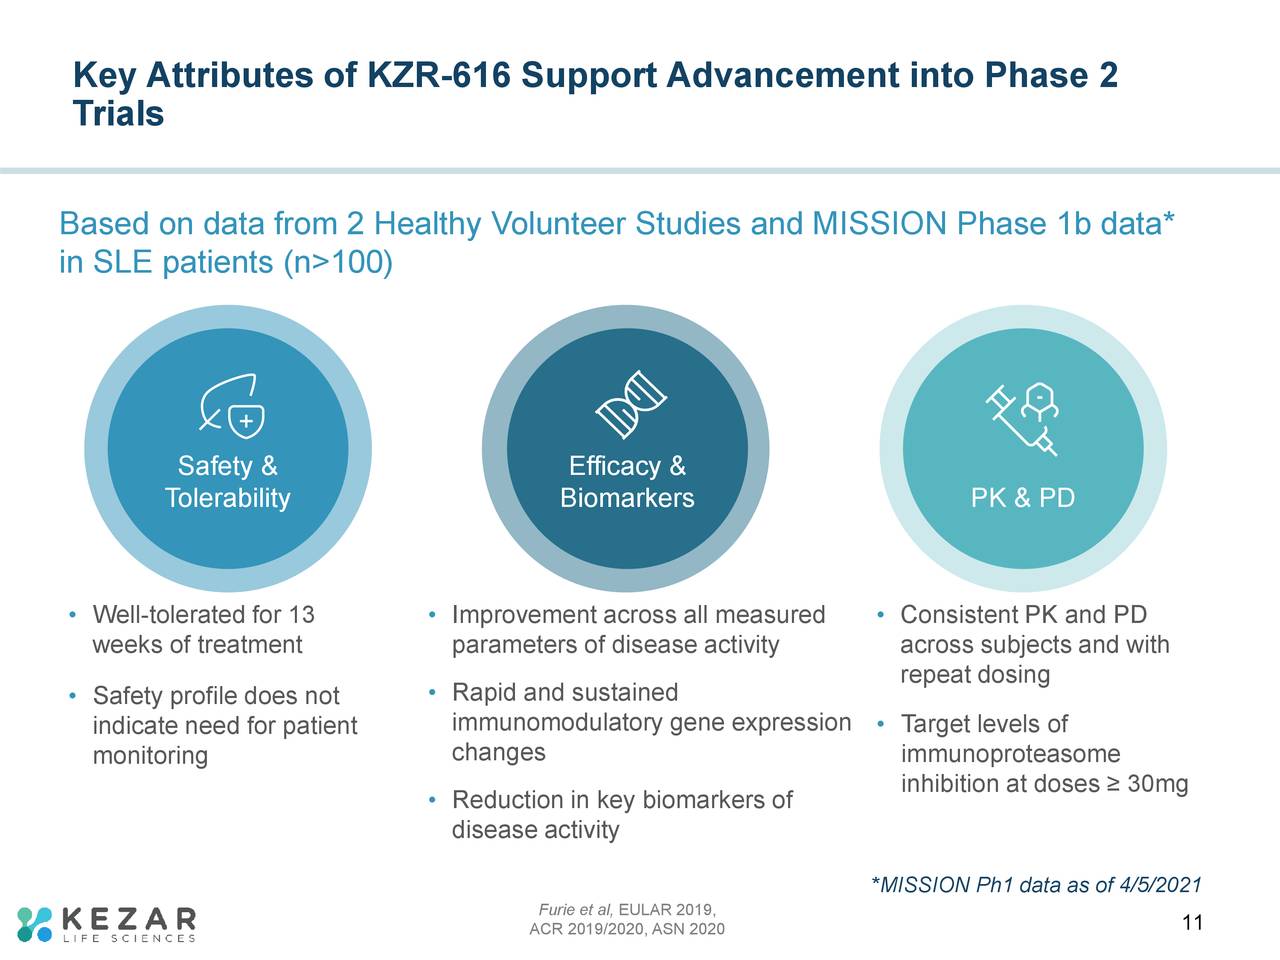 Key Attributes of KZR-616 Support Advancement into Phase 2